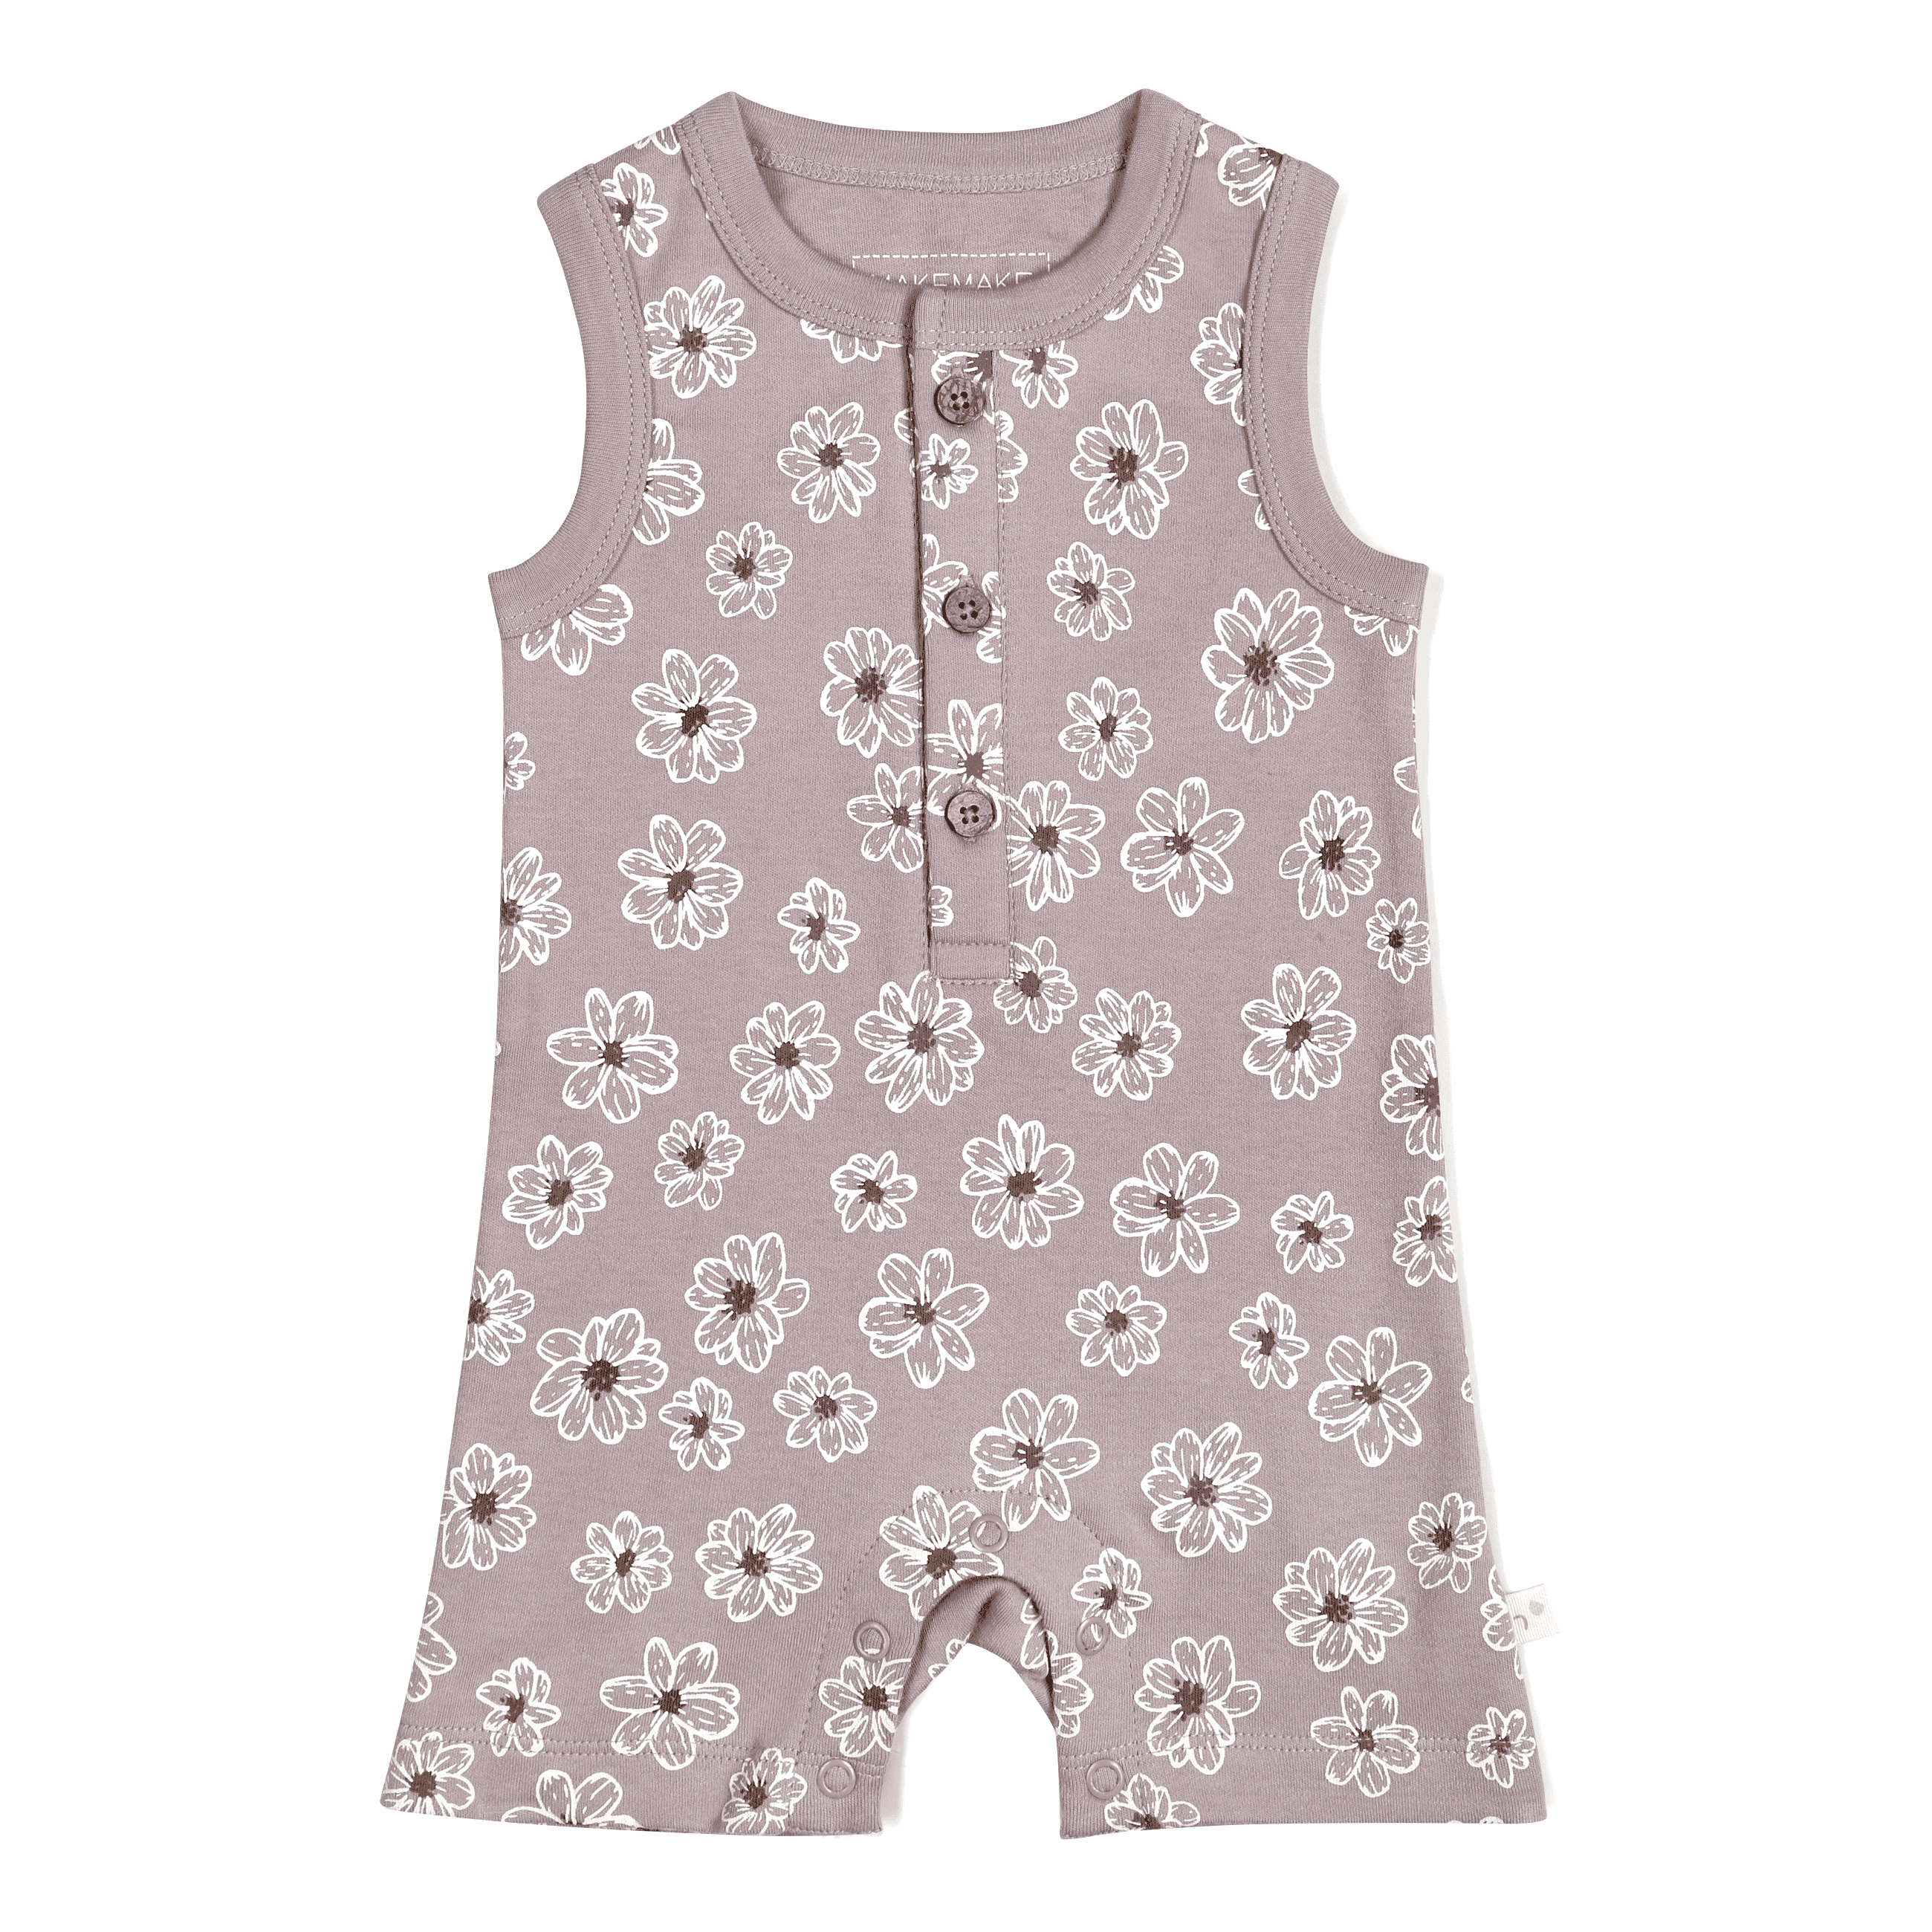 A sleeveless toddler romper in a dusty pink color with an all-over white floral print, featuring snap closures at the front and along the inseam for easy dressing, such as the Organic Sleeveless Short Romper - Daisies by Makemake Organics.